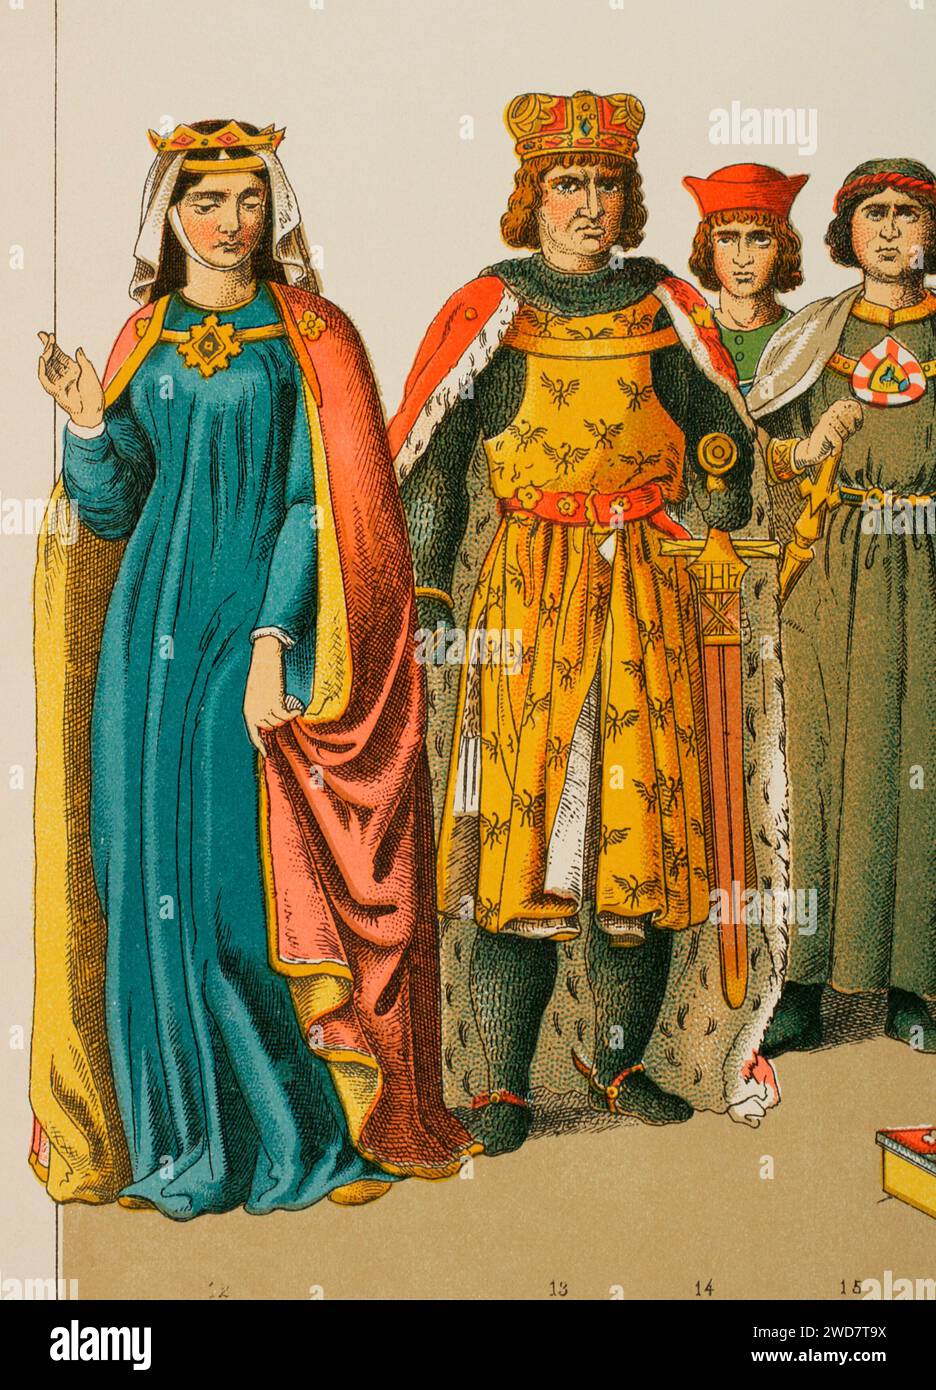 History of Germany. 1200. From left to right, 12: Anna of Hohenstaufen (1230-1307), daughter of Frederick II, 13: Archduke Henry of Breslau, ca. 1258-1290, 14-15: Counts. Chromolithography. 'Historia Universal', by César Cantú. Volume X, 1881. Stock Photo